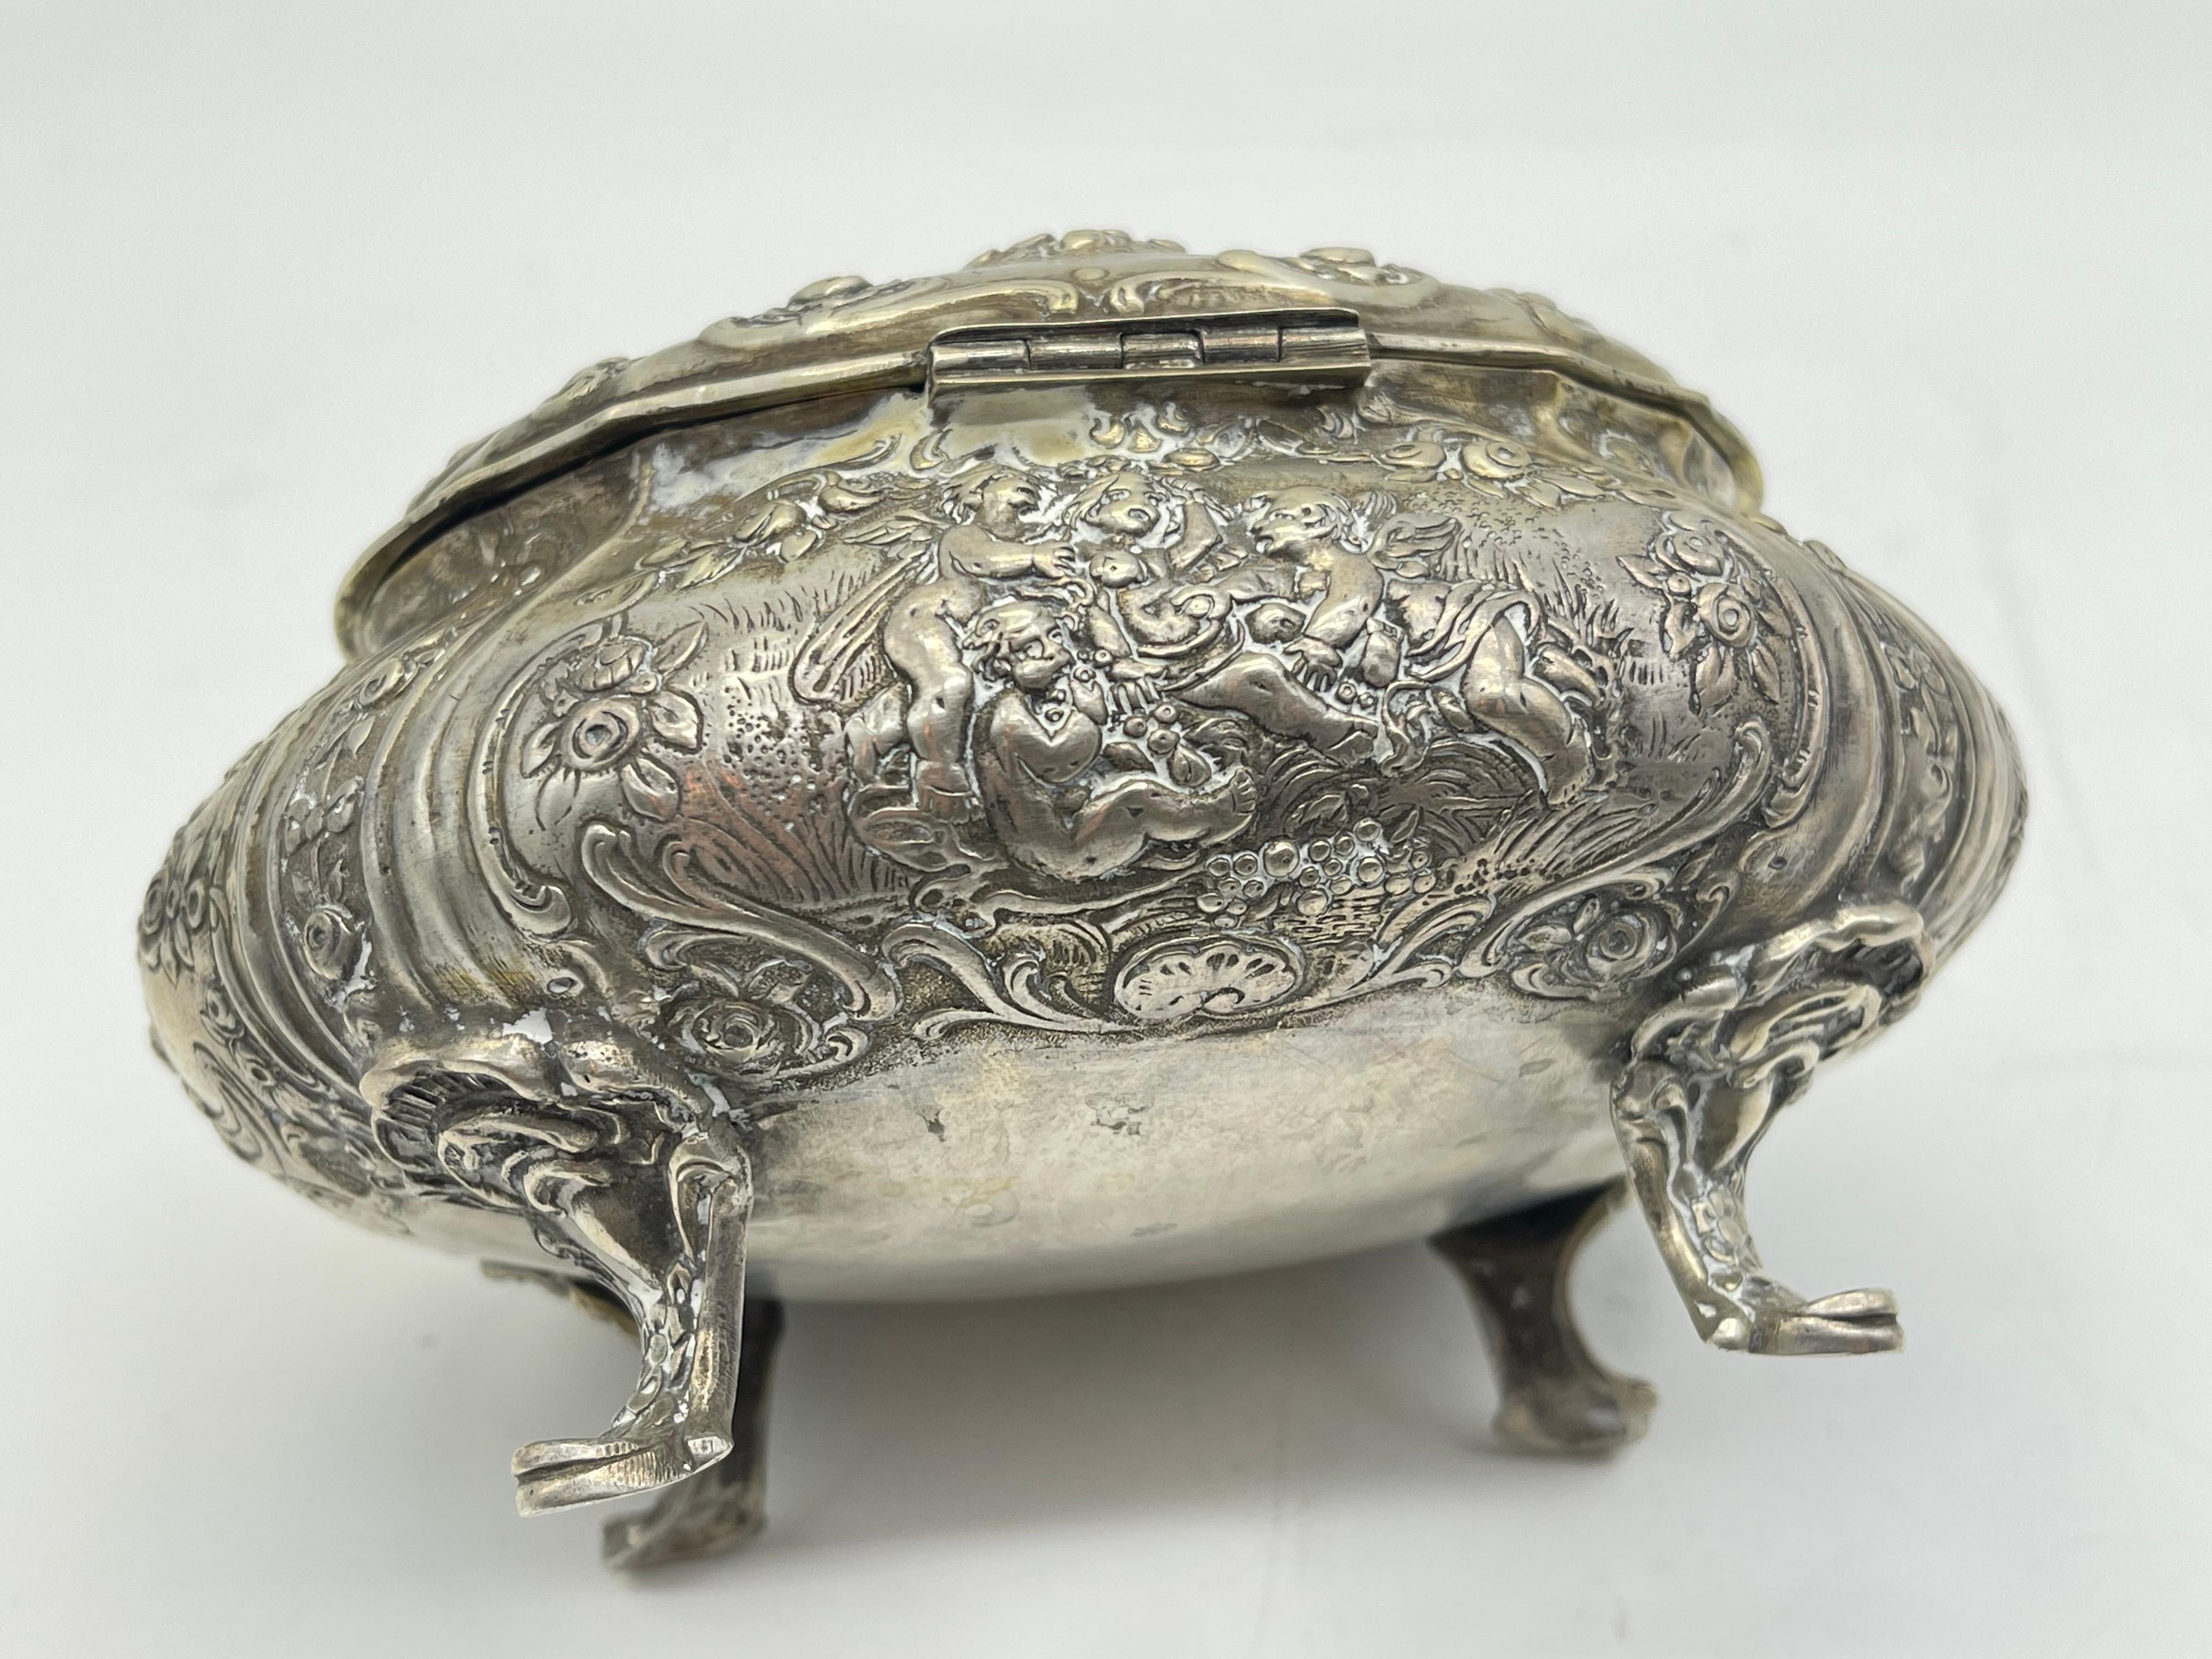 Exclusive Bonboniere / Sugar Lidded box 800 Silver Germany gilded, Flowers Putto For Sale 14